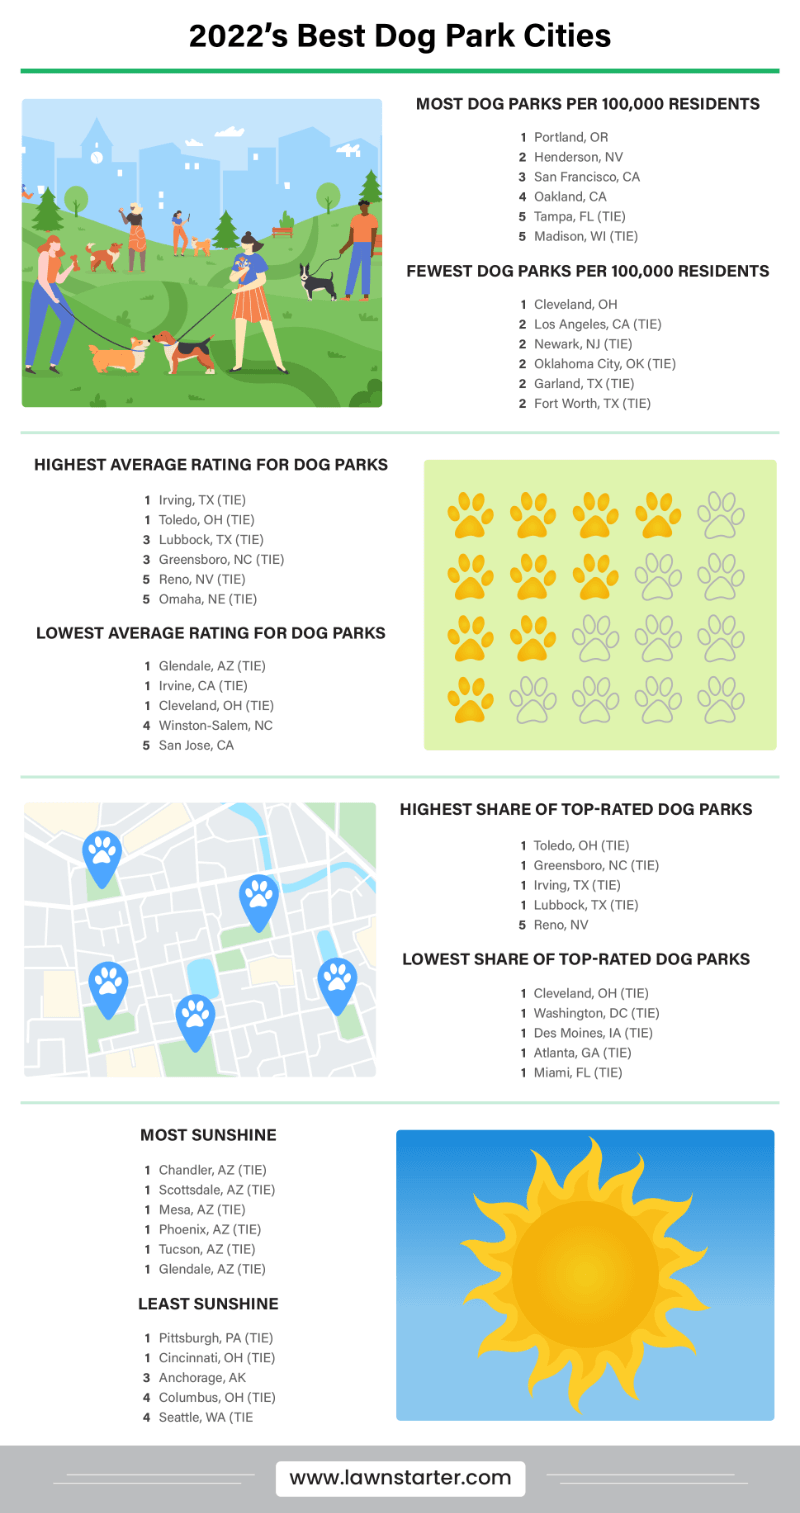 2022s Best dog park cities infographic is based on  amount of dog parks, dog park ratings, sunshine, and more!